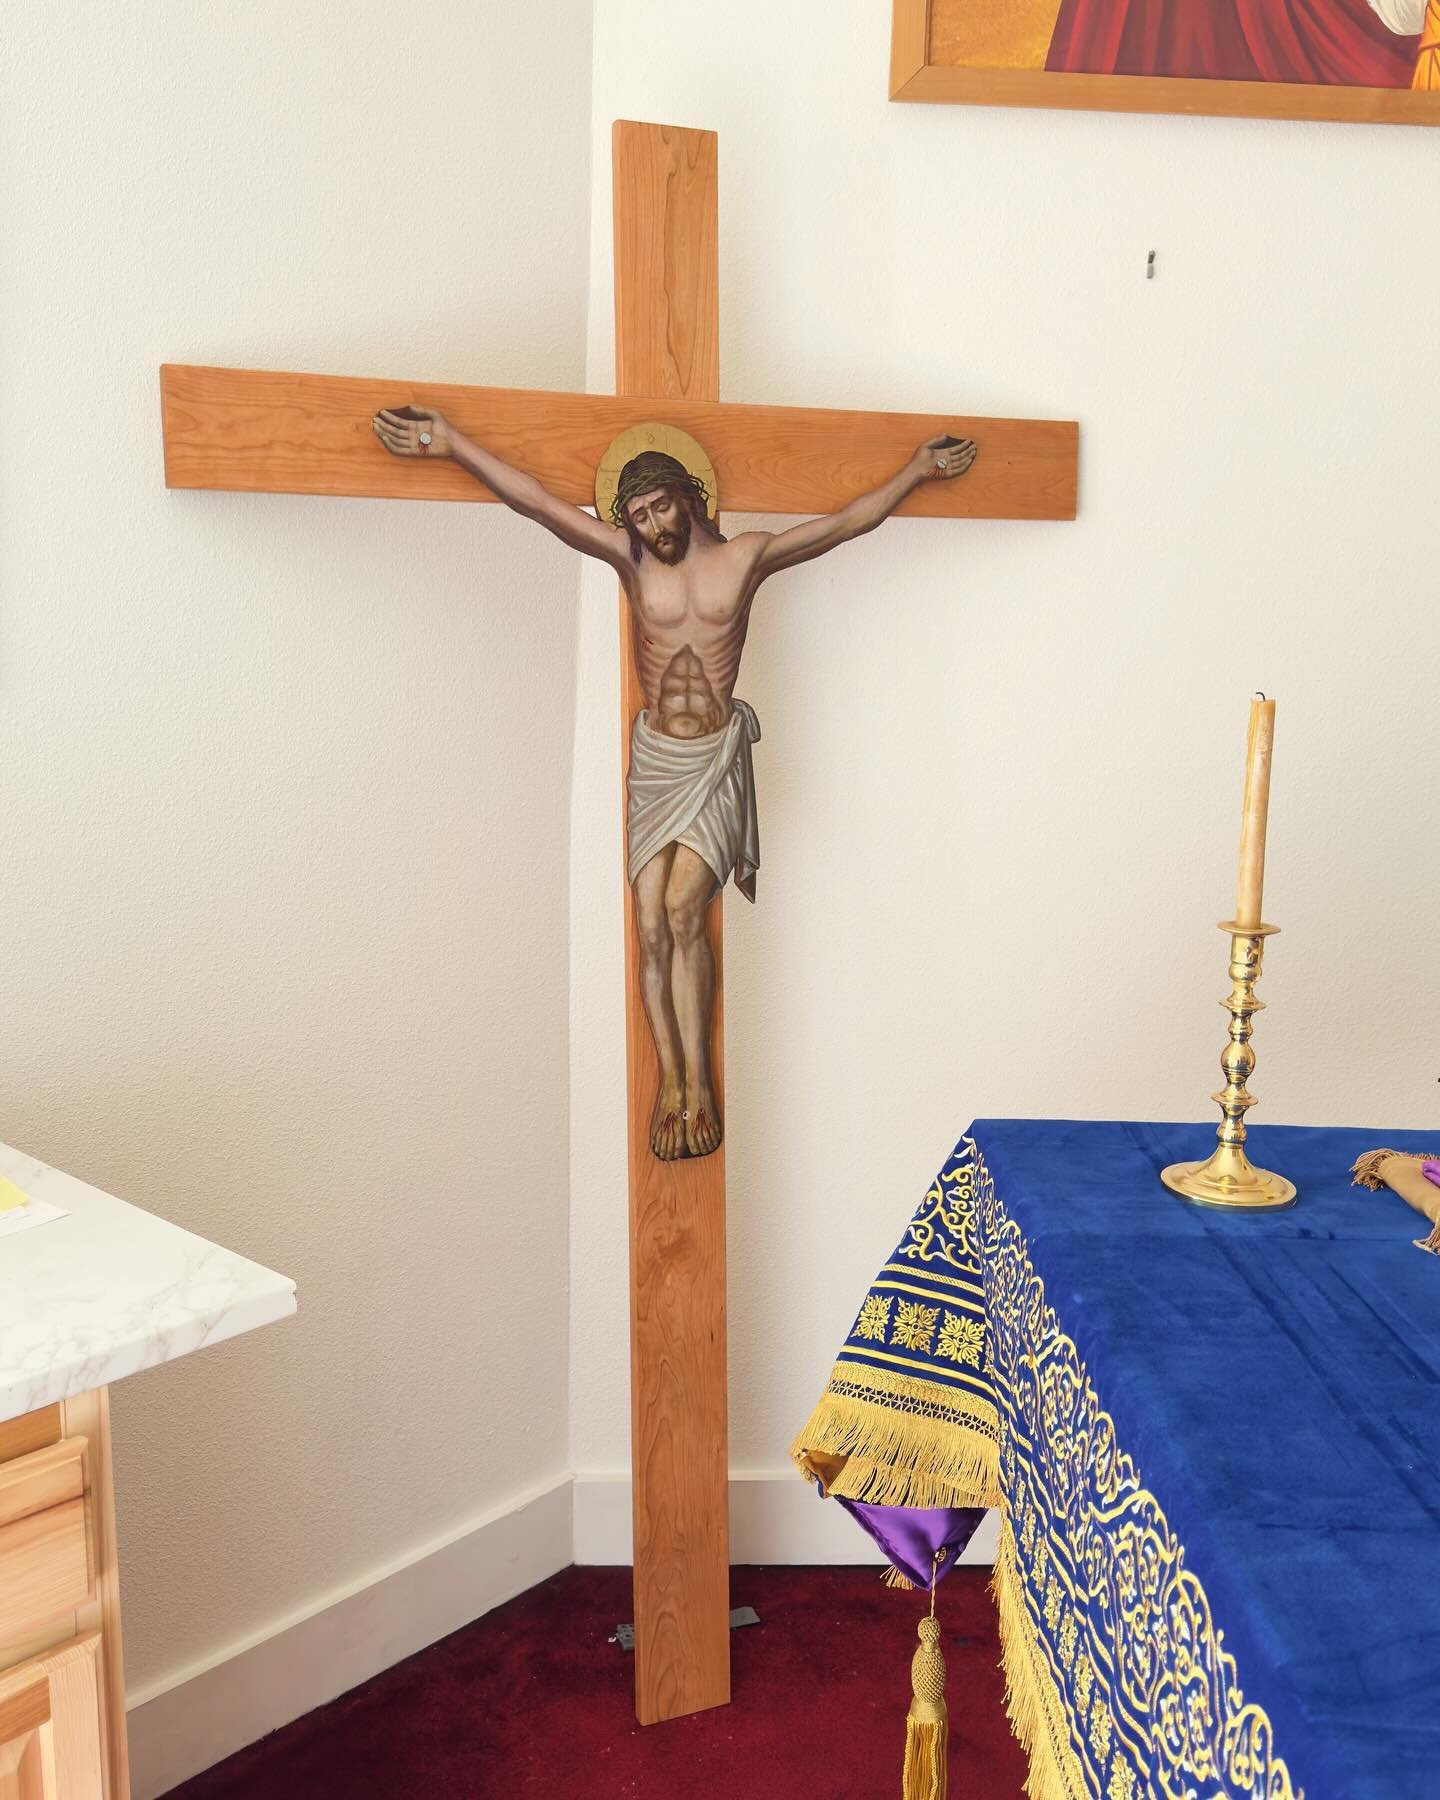 In addition to our refreshed Narthex, our parishioners have come together to craft a new cross and base for our altar and use during Holy Week. 

May God bless them and their offerings to the church! With special thanks to @andrewageorge and Dan Fusc